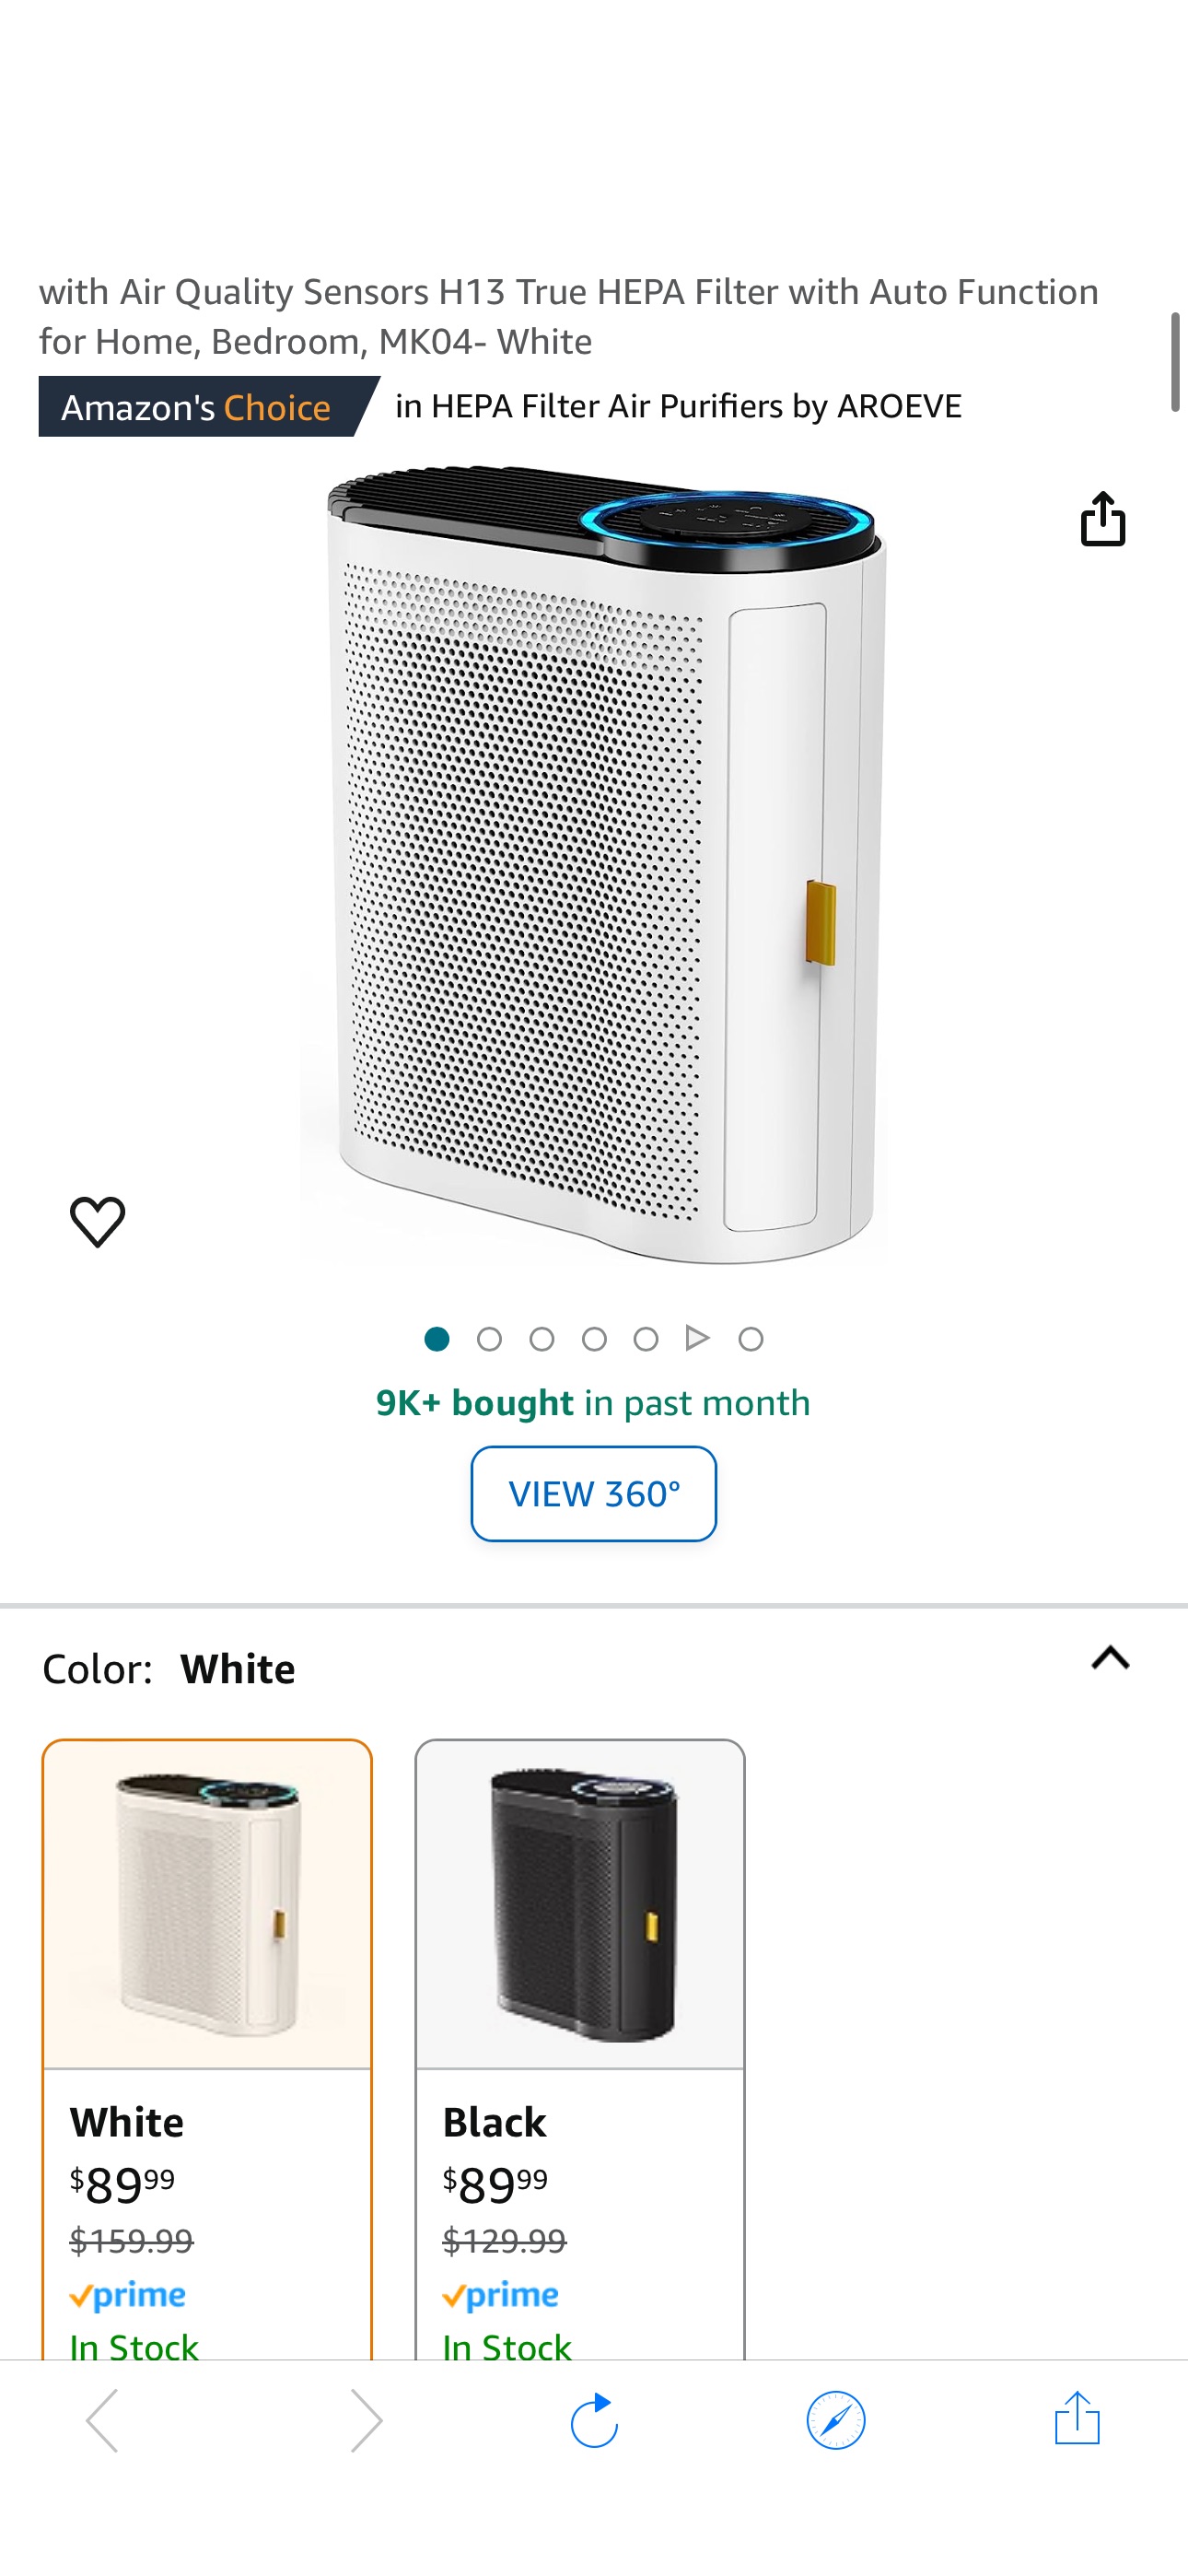 Amazon.com: $79.99 AROEVE Air Purifiers for Large Room Up to 1095 Sq Ft Coverage with Air Quality Sensors H13 True HEPA Filter

Clip coupon